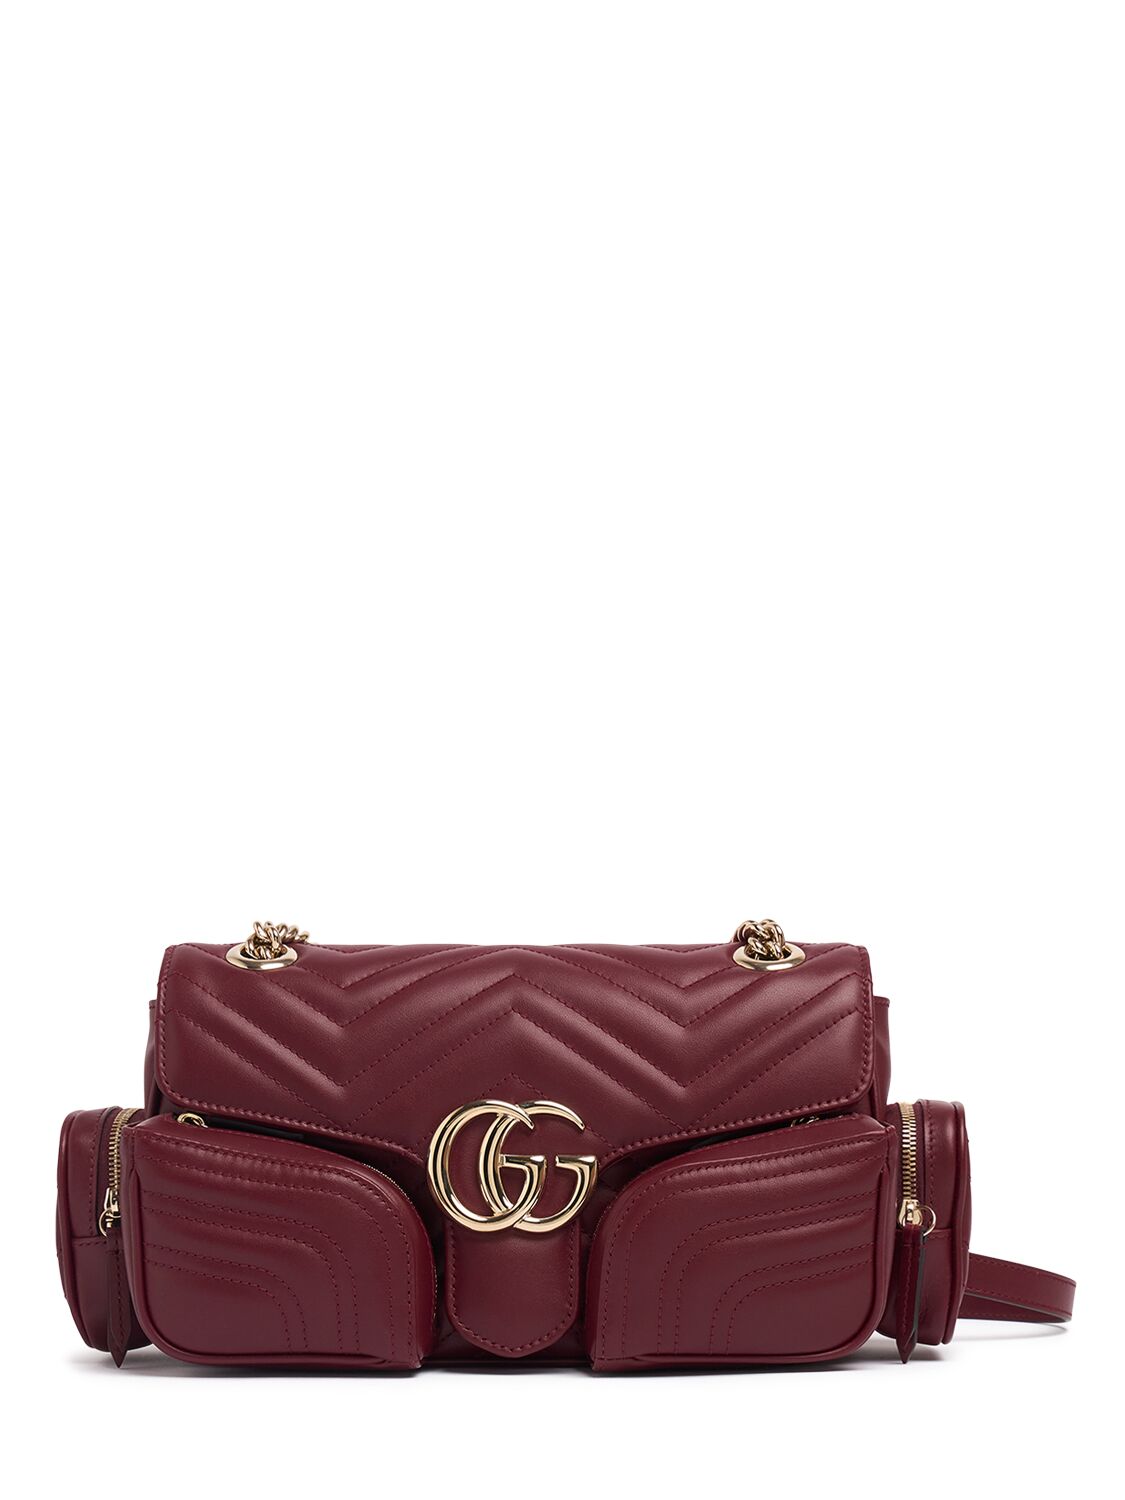 Gucci Gg Marmont Leather Shoulder Bag In Rosso Ancora